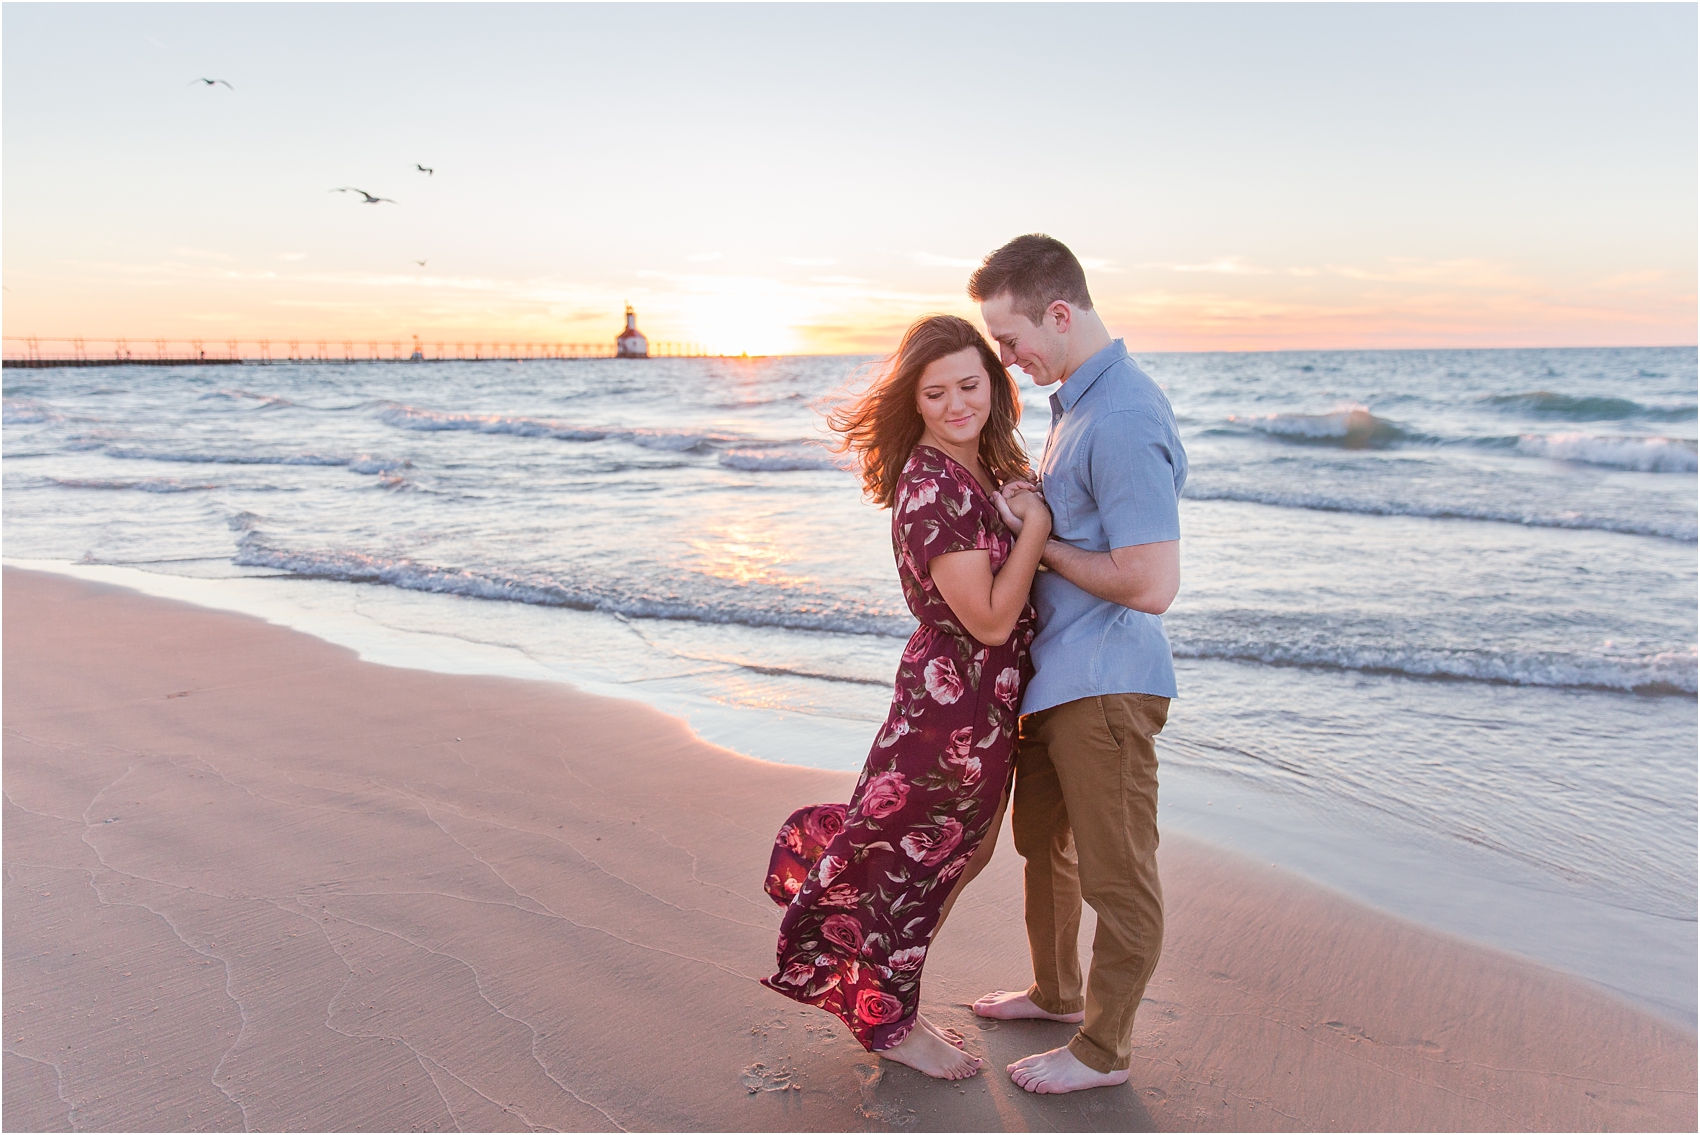 candid-end-of-summer-sunset-engagement-photos-at-silver-beach-in-st-joseph-mi-by-courtney-carolyn-photography_0039.jpg